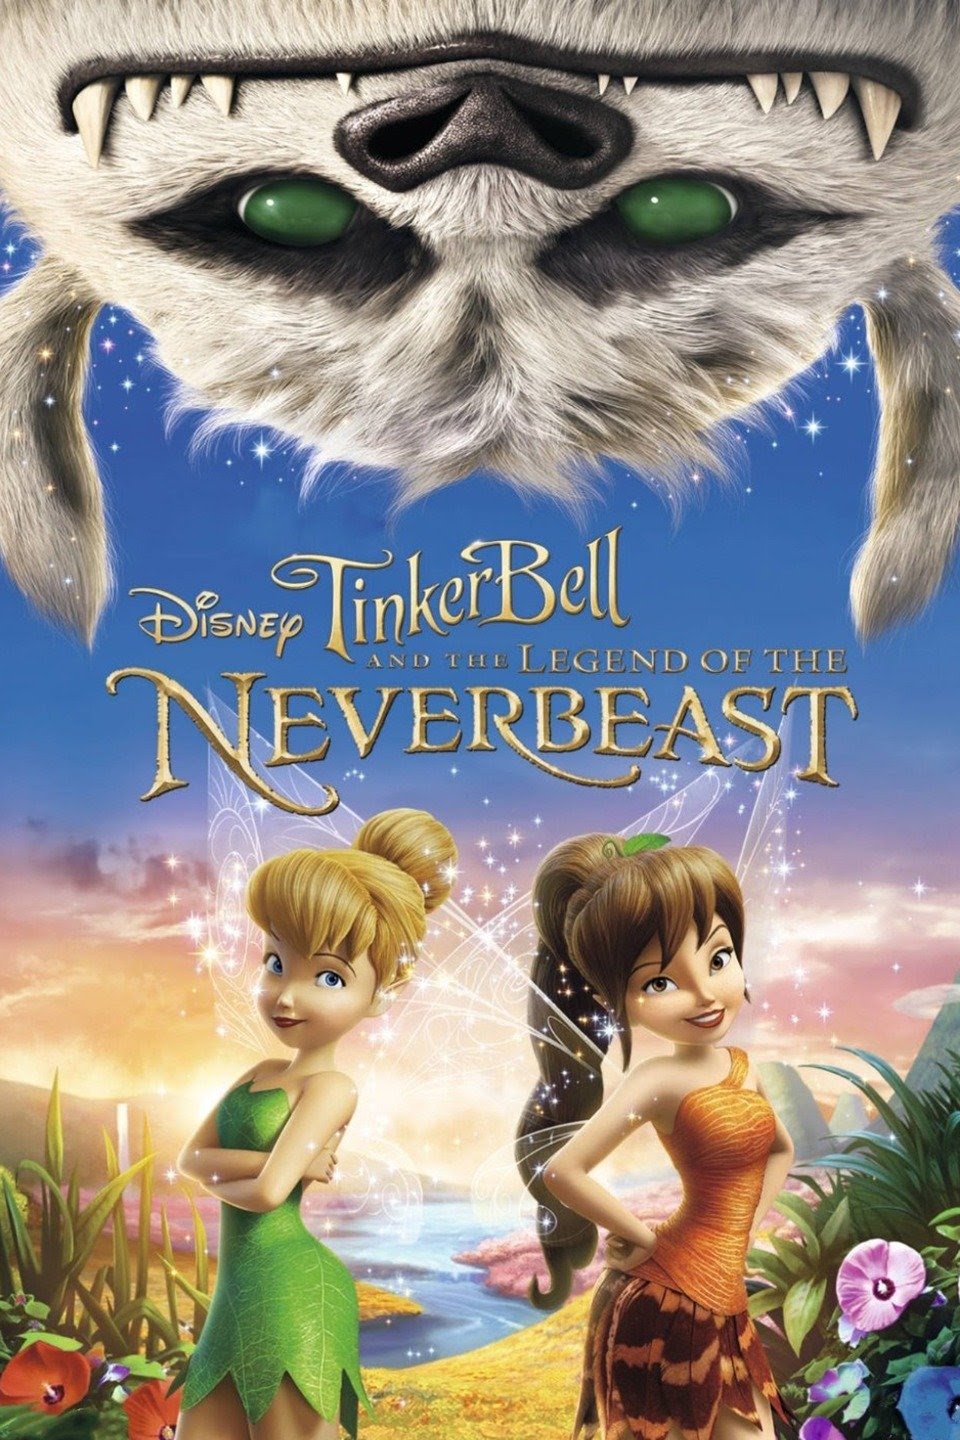 Tinkerbell And The Legend Of The NeverBeast (2015) Vudu or Movies Anywhere HD redemption only